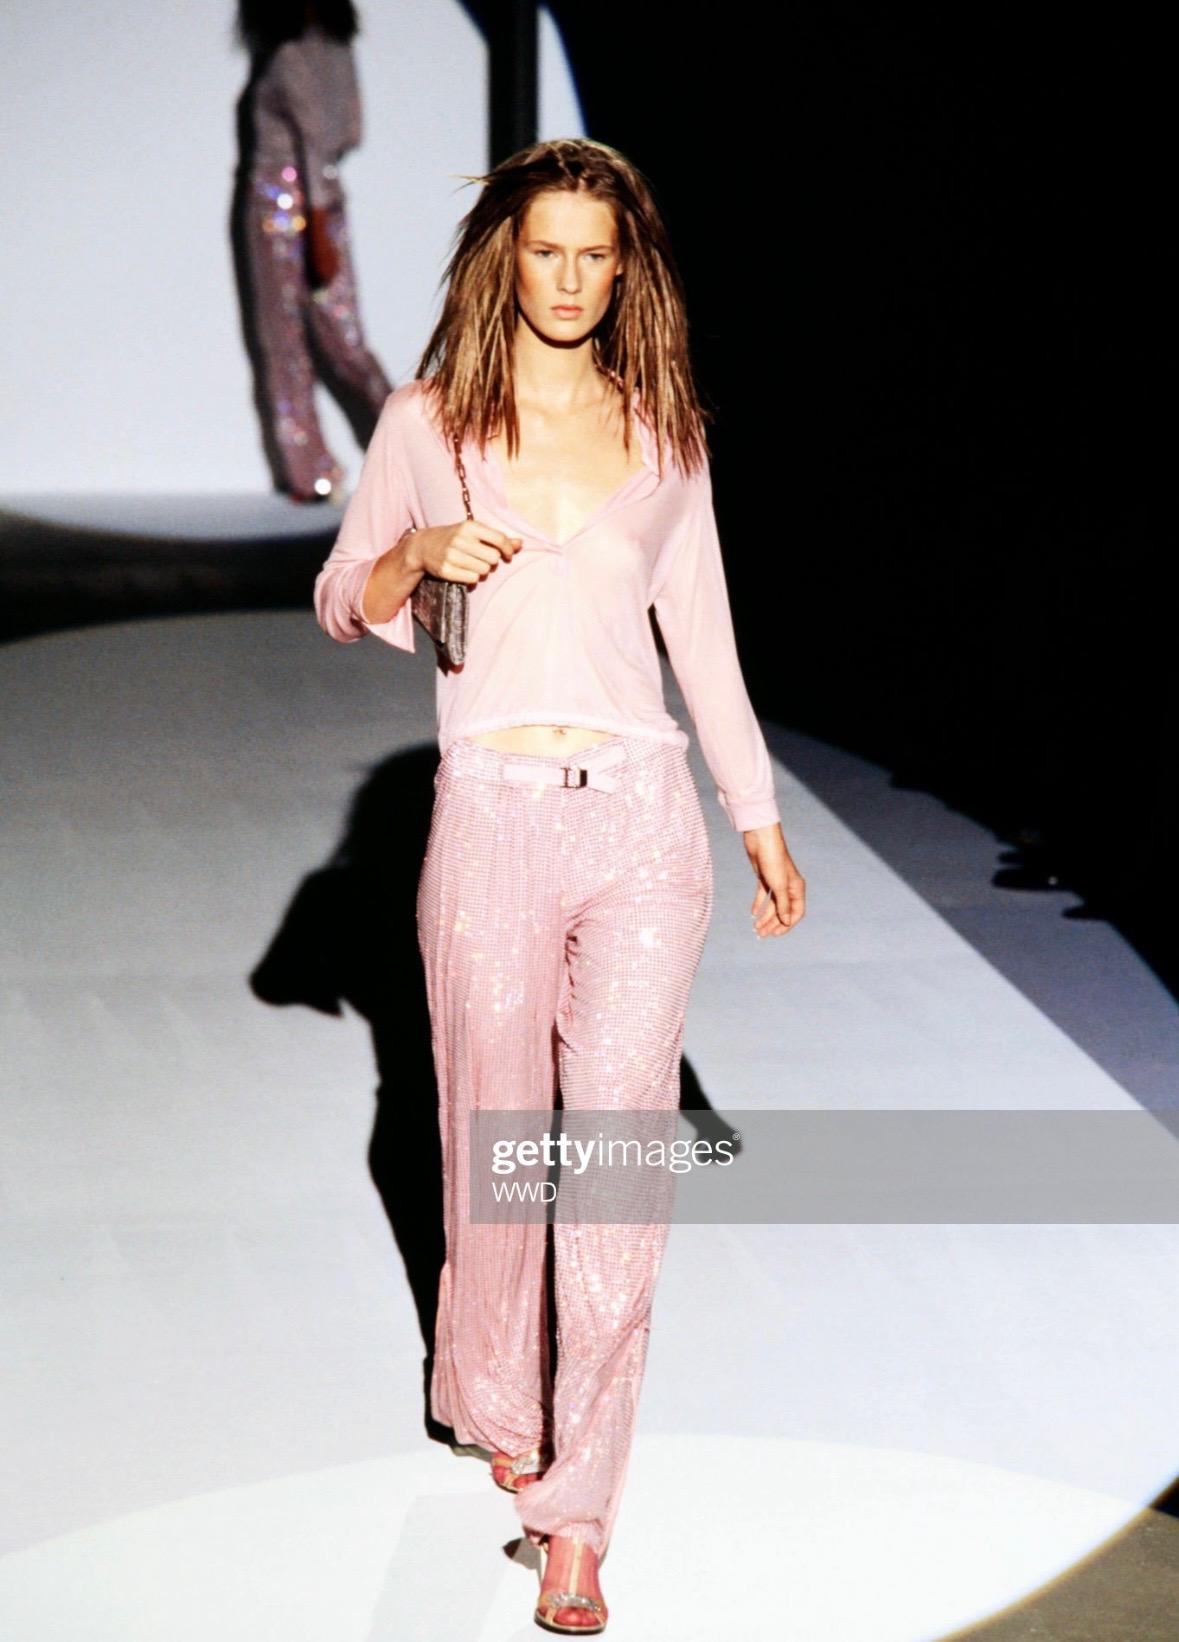 NWT S/S 2000 Gucci by Tom Ford Runway Ad Plunging Pink Collared Blouse Top For Sale 1